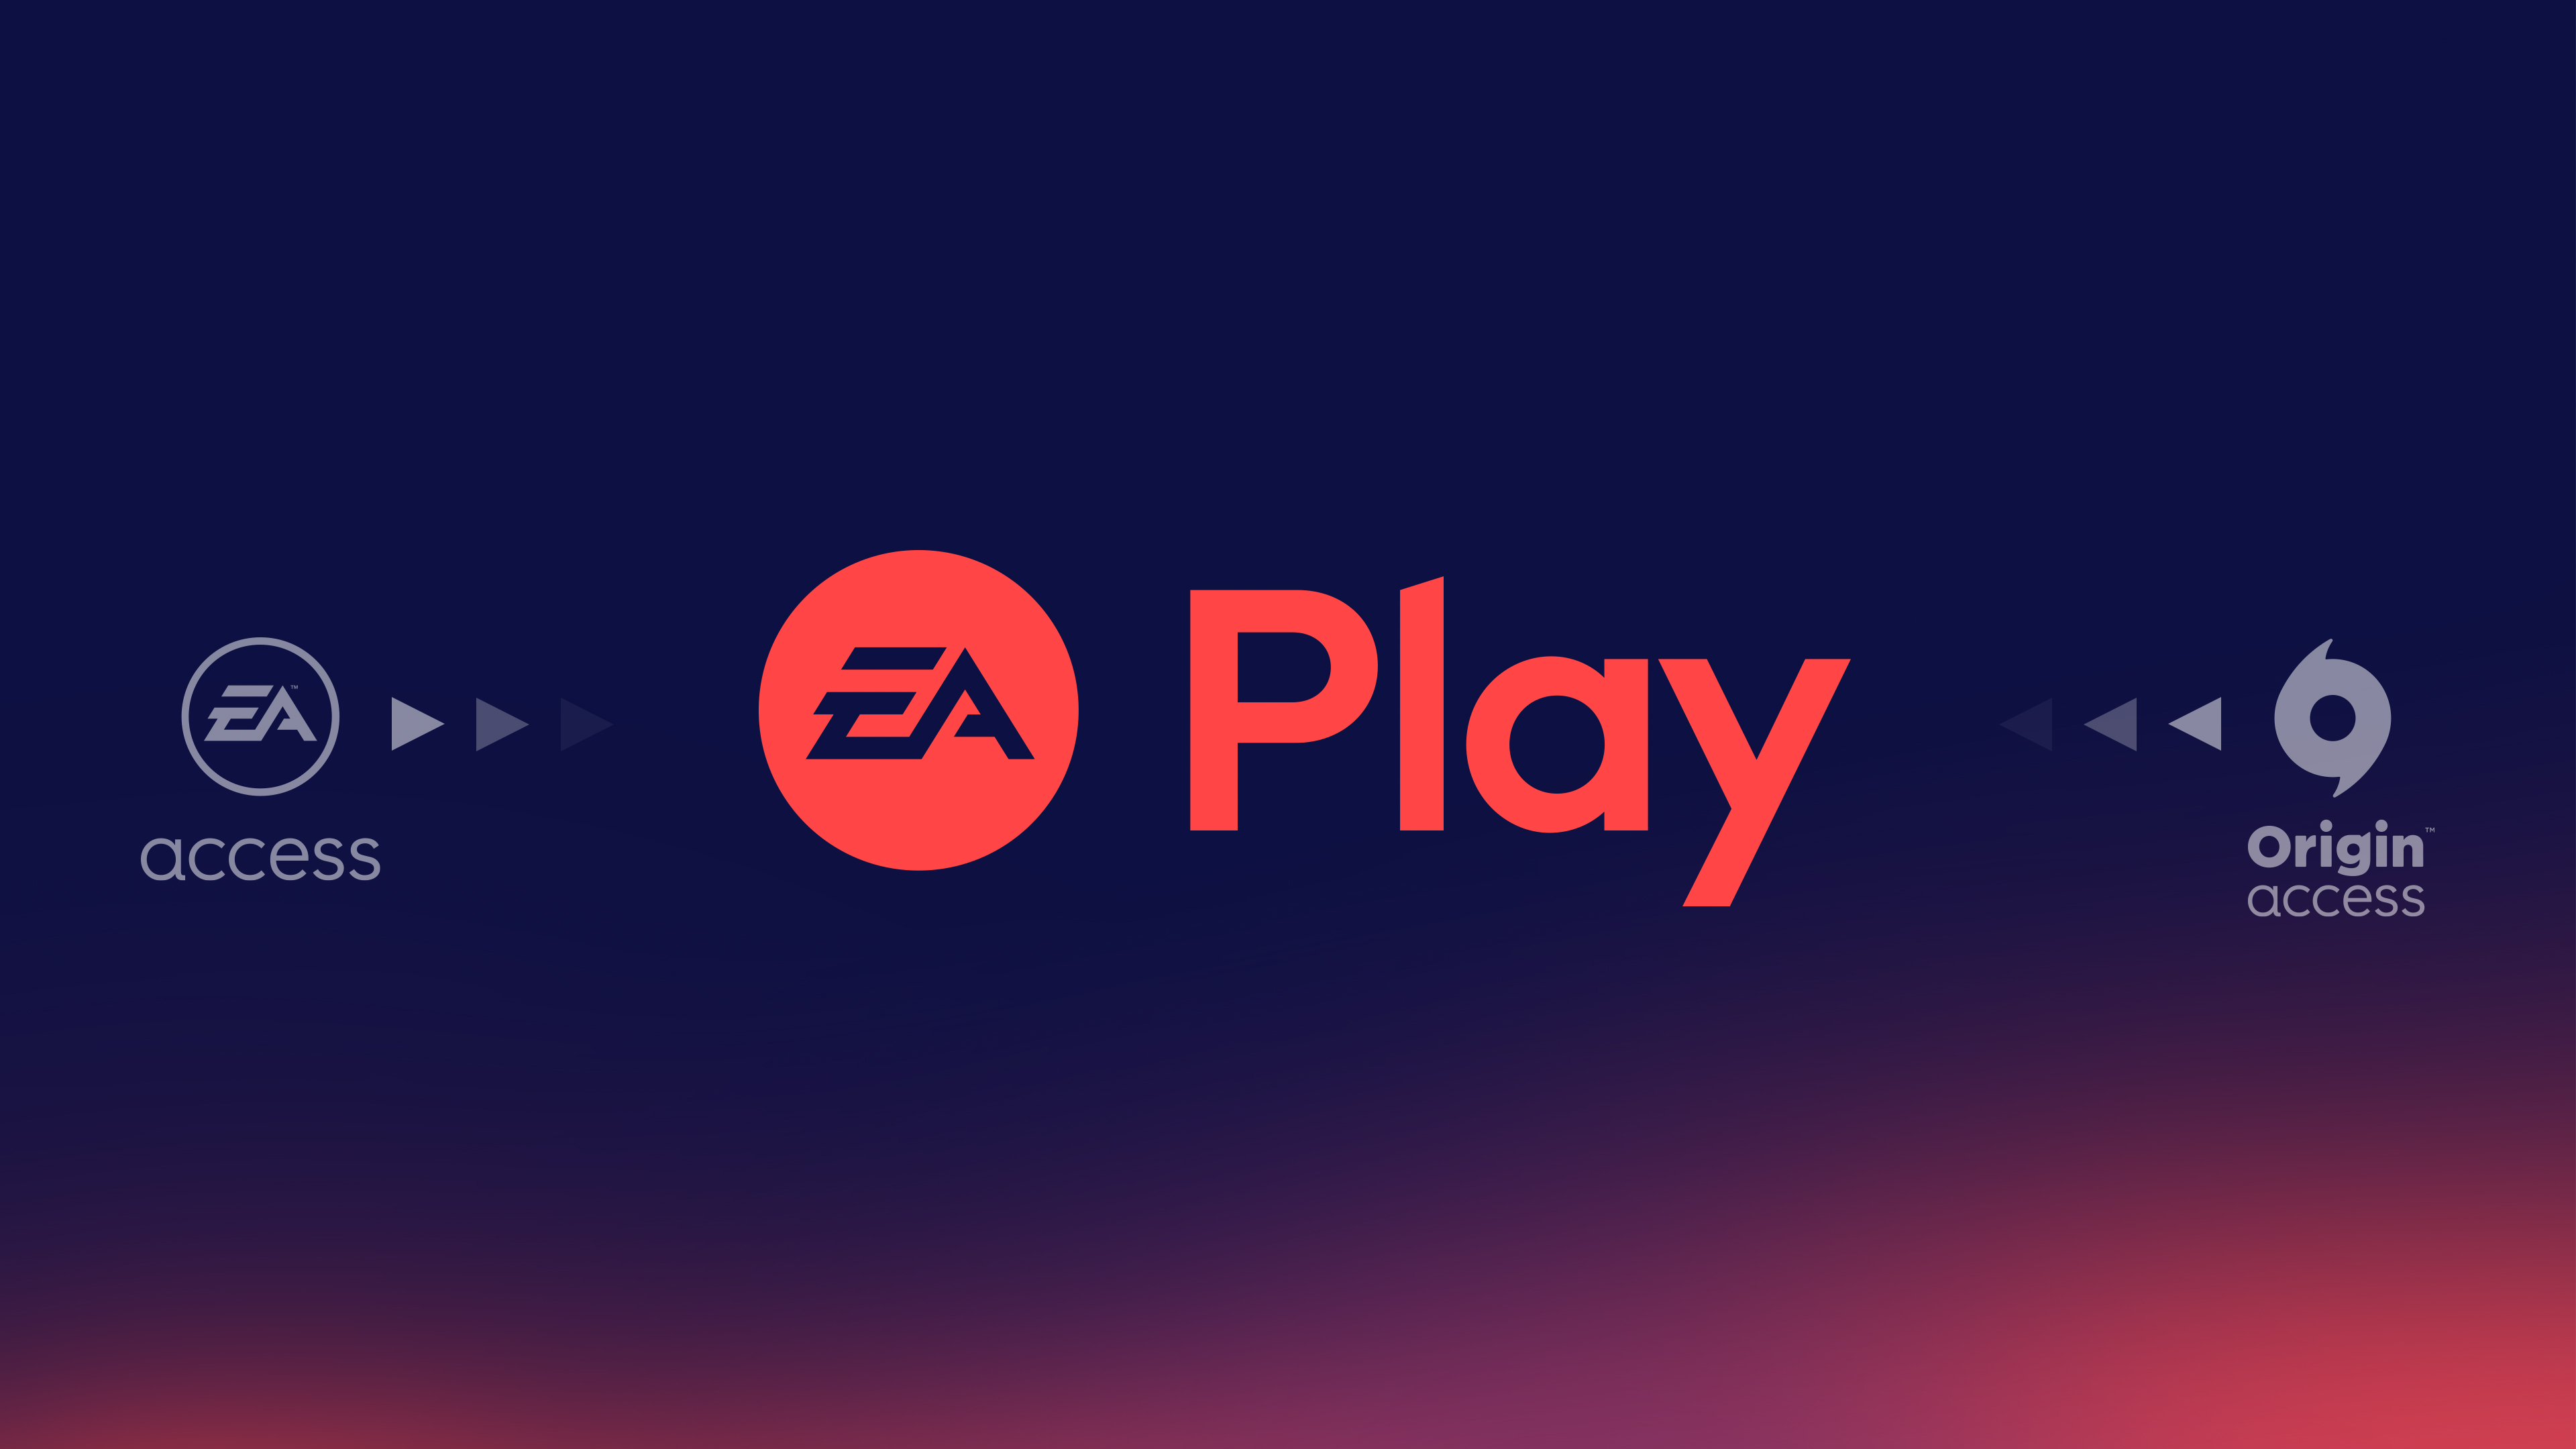 how to use ea play with game pass on pc